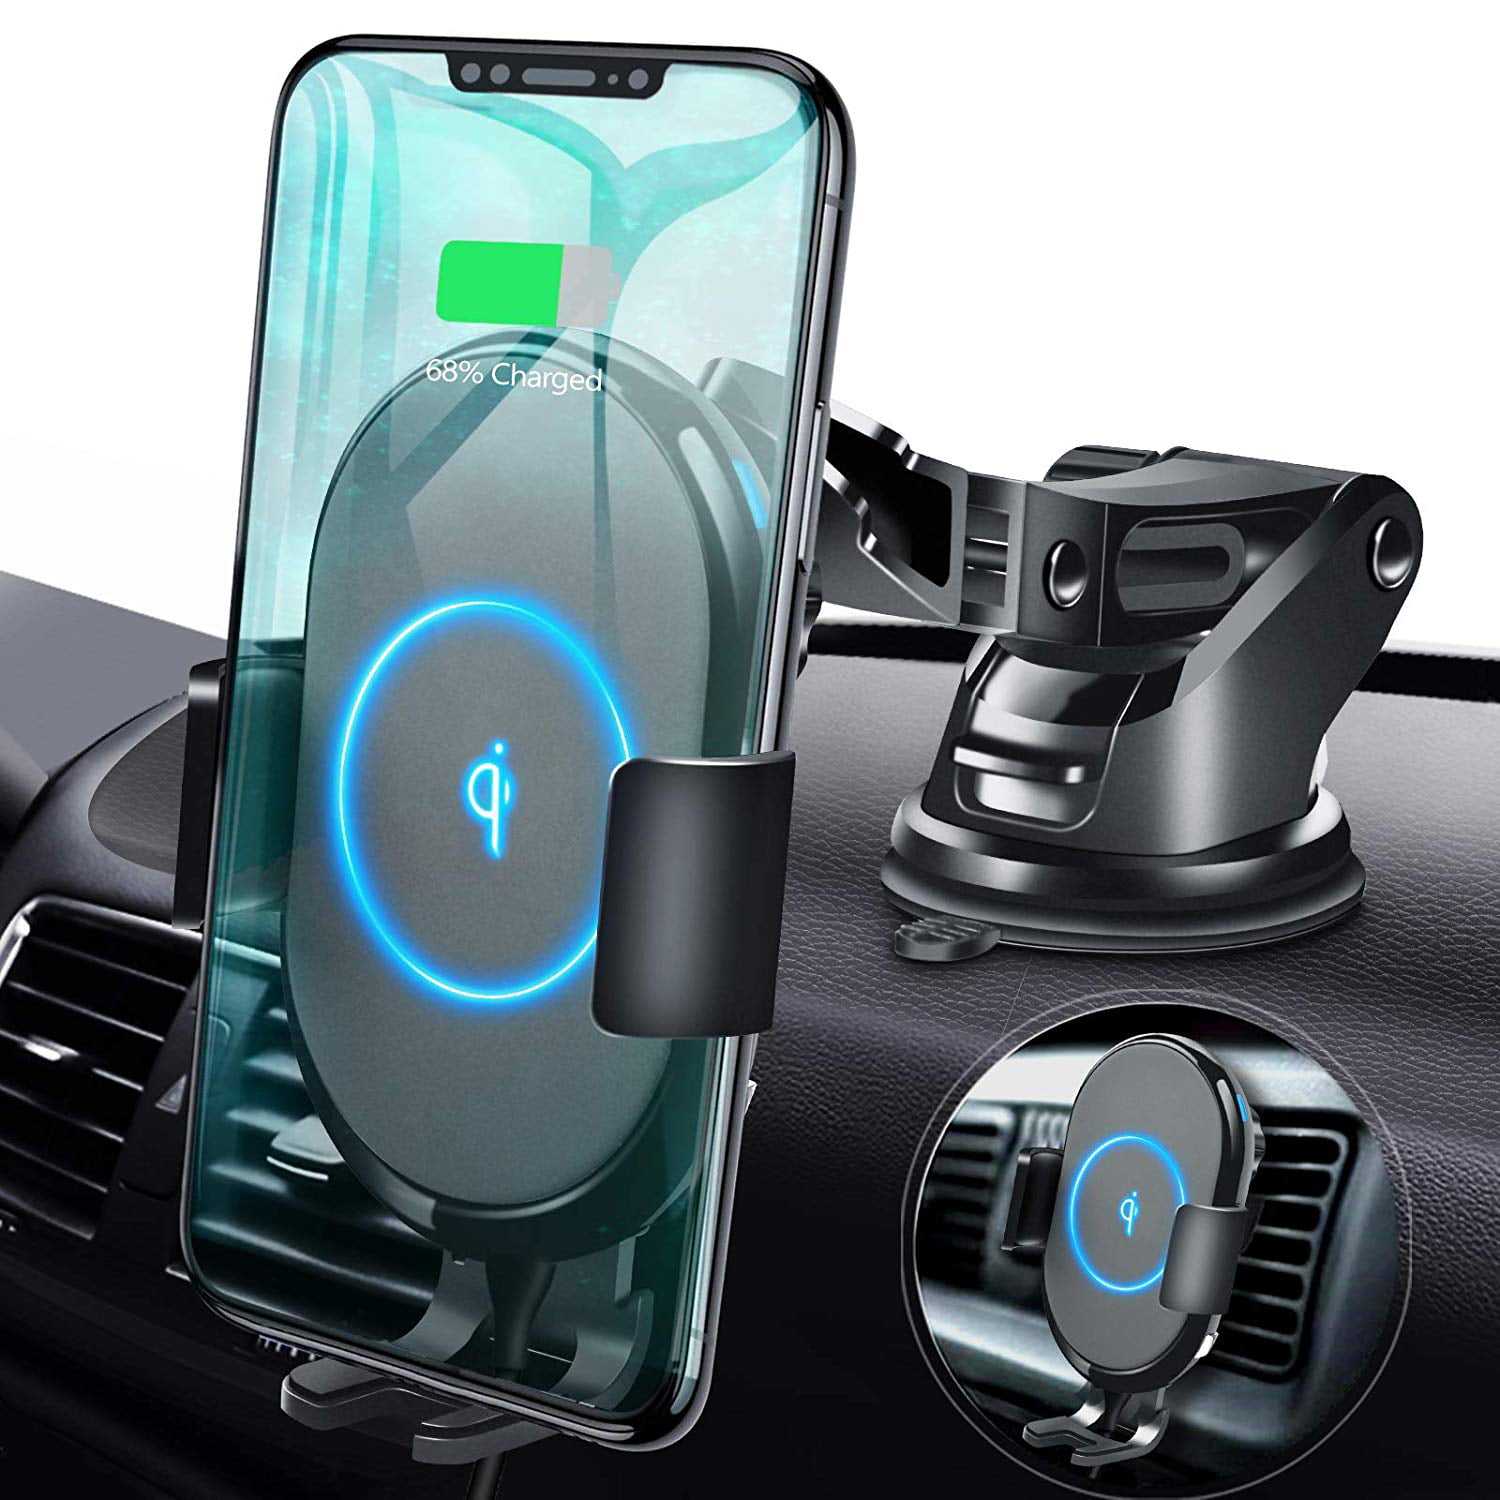 Dashboard and Air Vent Holder Samsung S10 S9 S8 Wireless Smart Car Charger Mount Intelligent Sensing Auto Clamping 10W/7.5W Qi Fast Charging Car Mount Compatible with iPhone 11 Pro Xs Max XR 8 Plus 